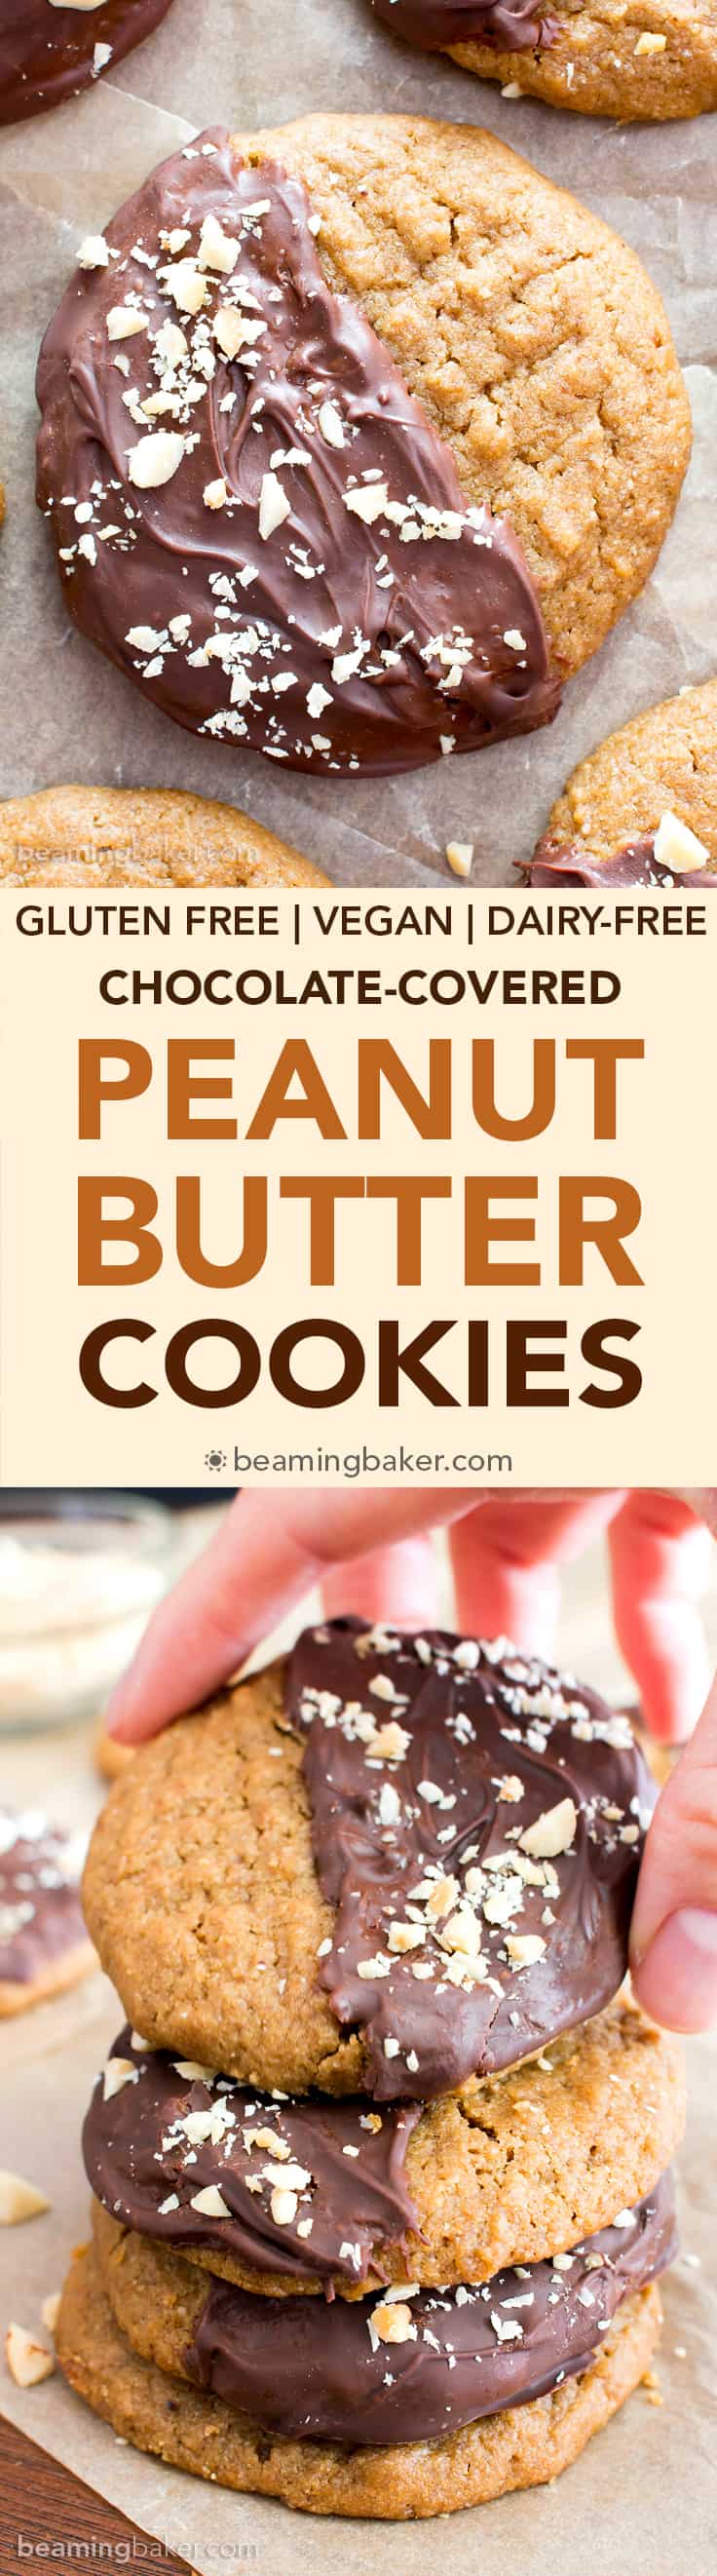 Chocolate Covered Peanut Butter Cookies (V, GF): an easy recipe for soft ‘n chewy peanut butter cookies wrapped in a velvety layer of chocolate and topped with crunchy peanuts. #Vegan #Desserts #GlutenFree #DairyFree #Healthy #Holiday | Recipe on BeamingBaker.com